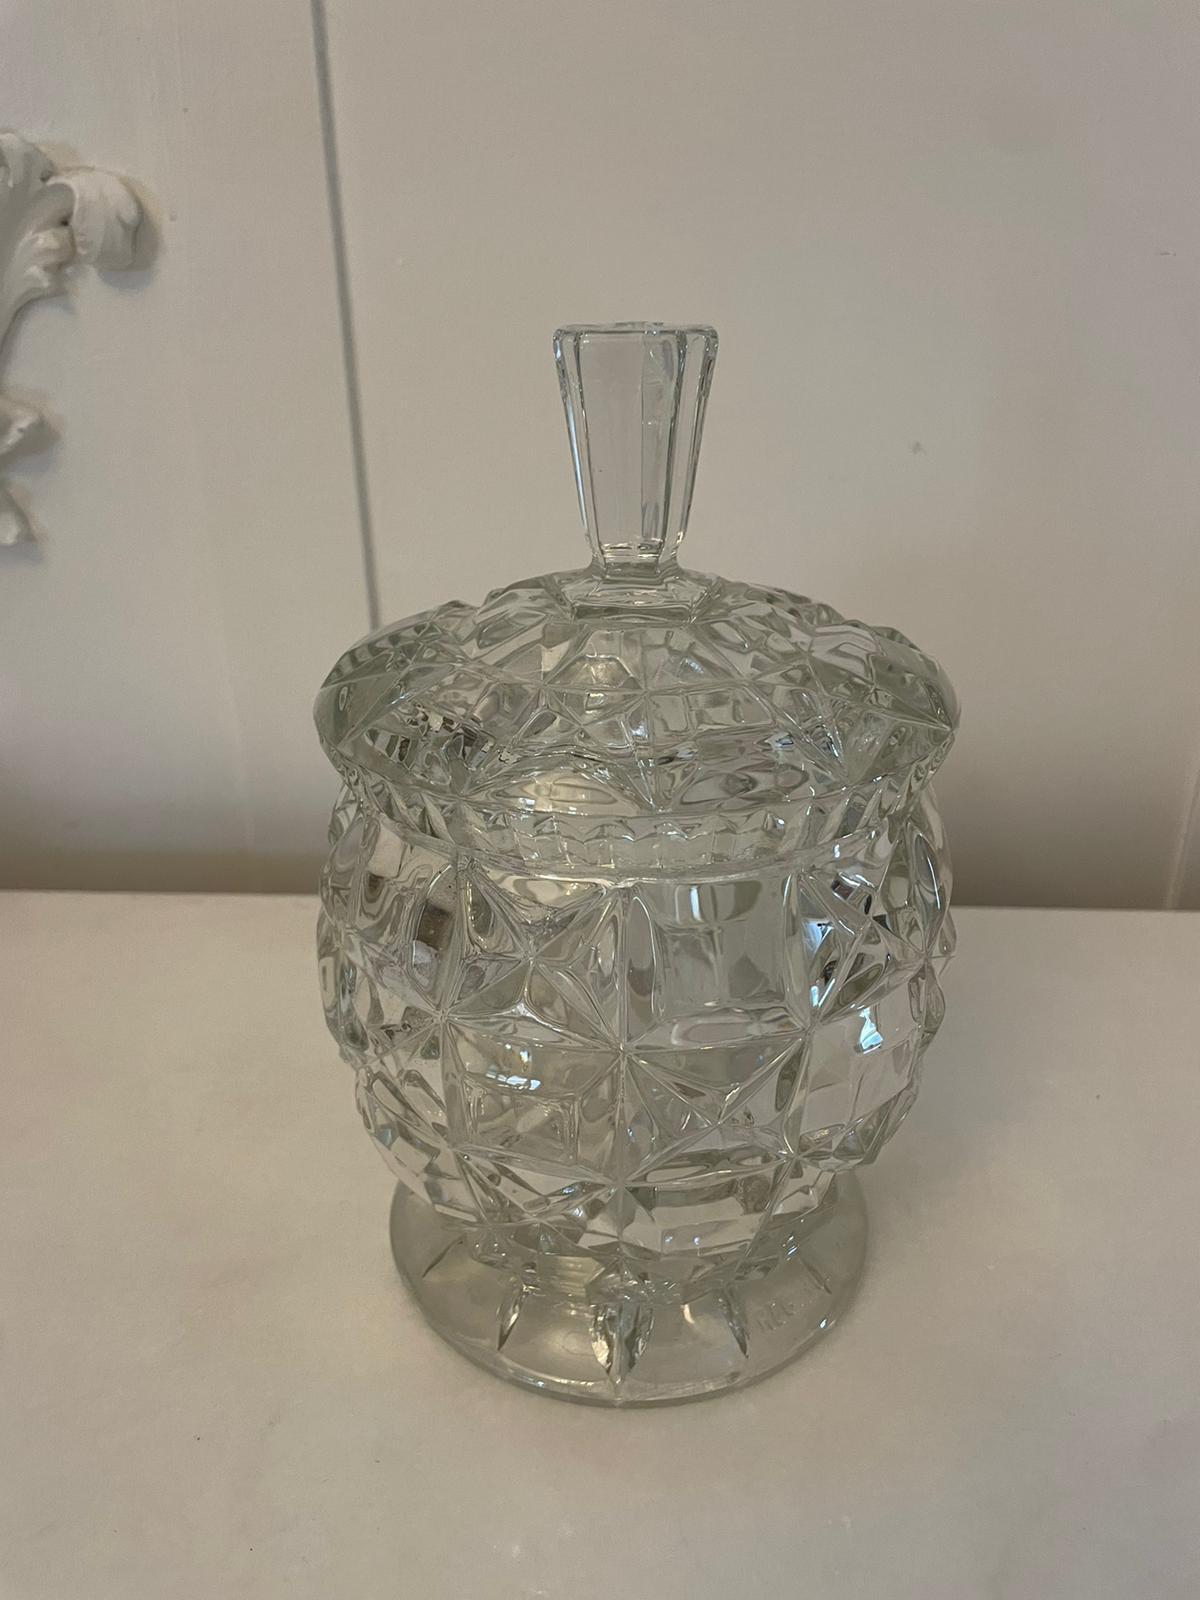 Antique Edwardian quality cut glass biscuit barrel having a quality cut glass biscuit barrel with the original lift off lid. Small chip to the inside of the lid which is not evident from the outside.

Dimensions:
Height 21 cm (8.26 in)
Width 14